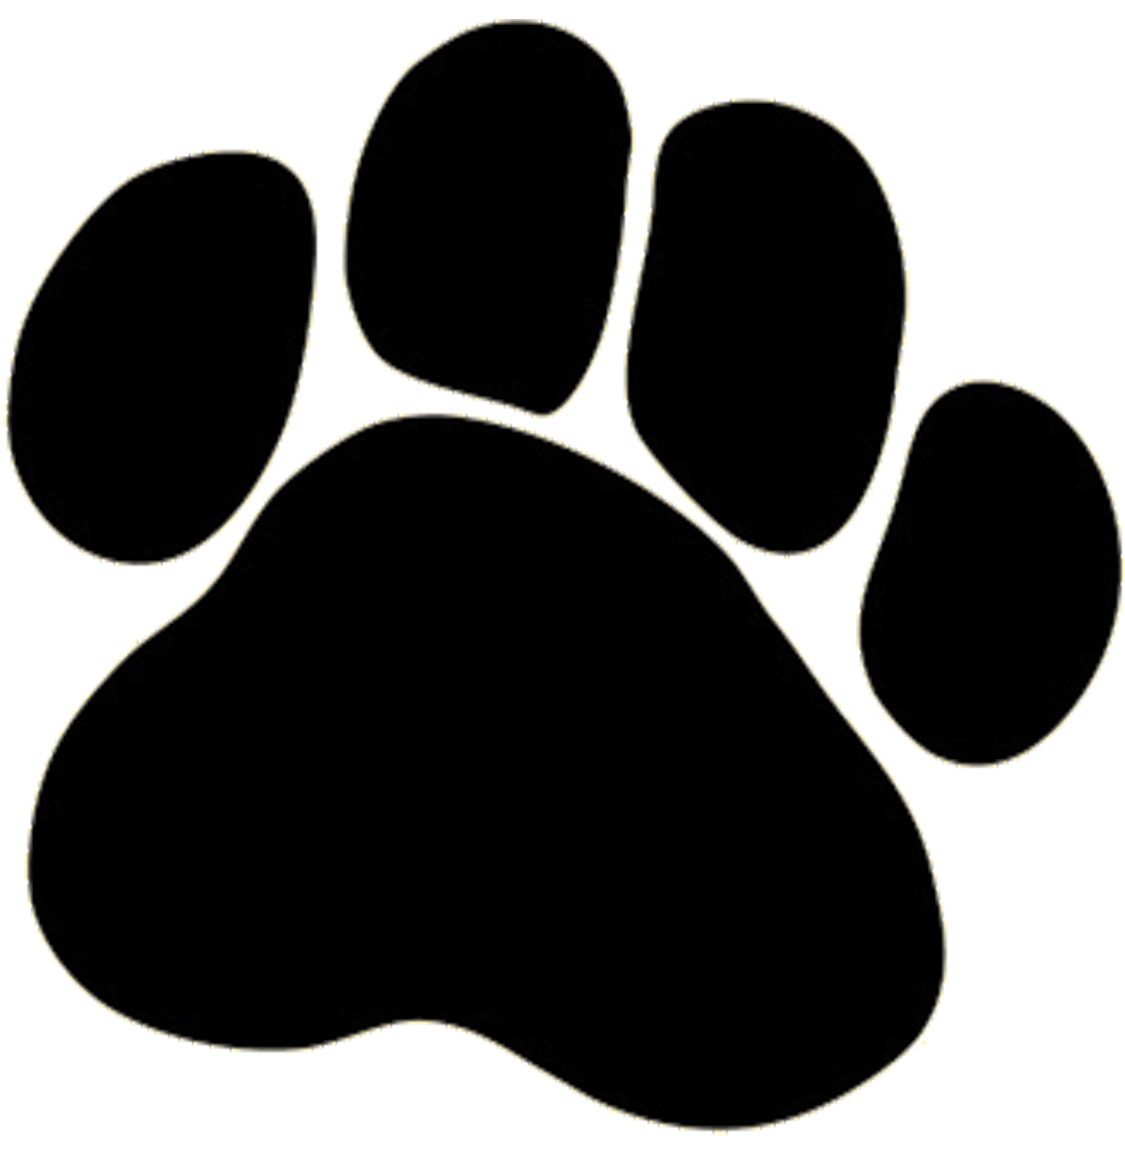 dog related clip art - photo #48